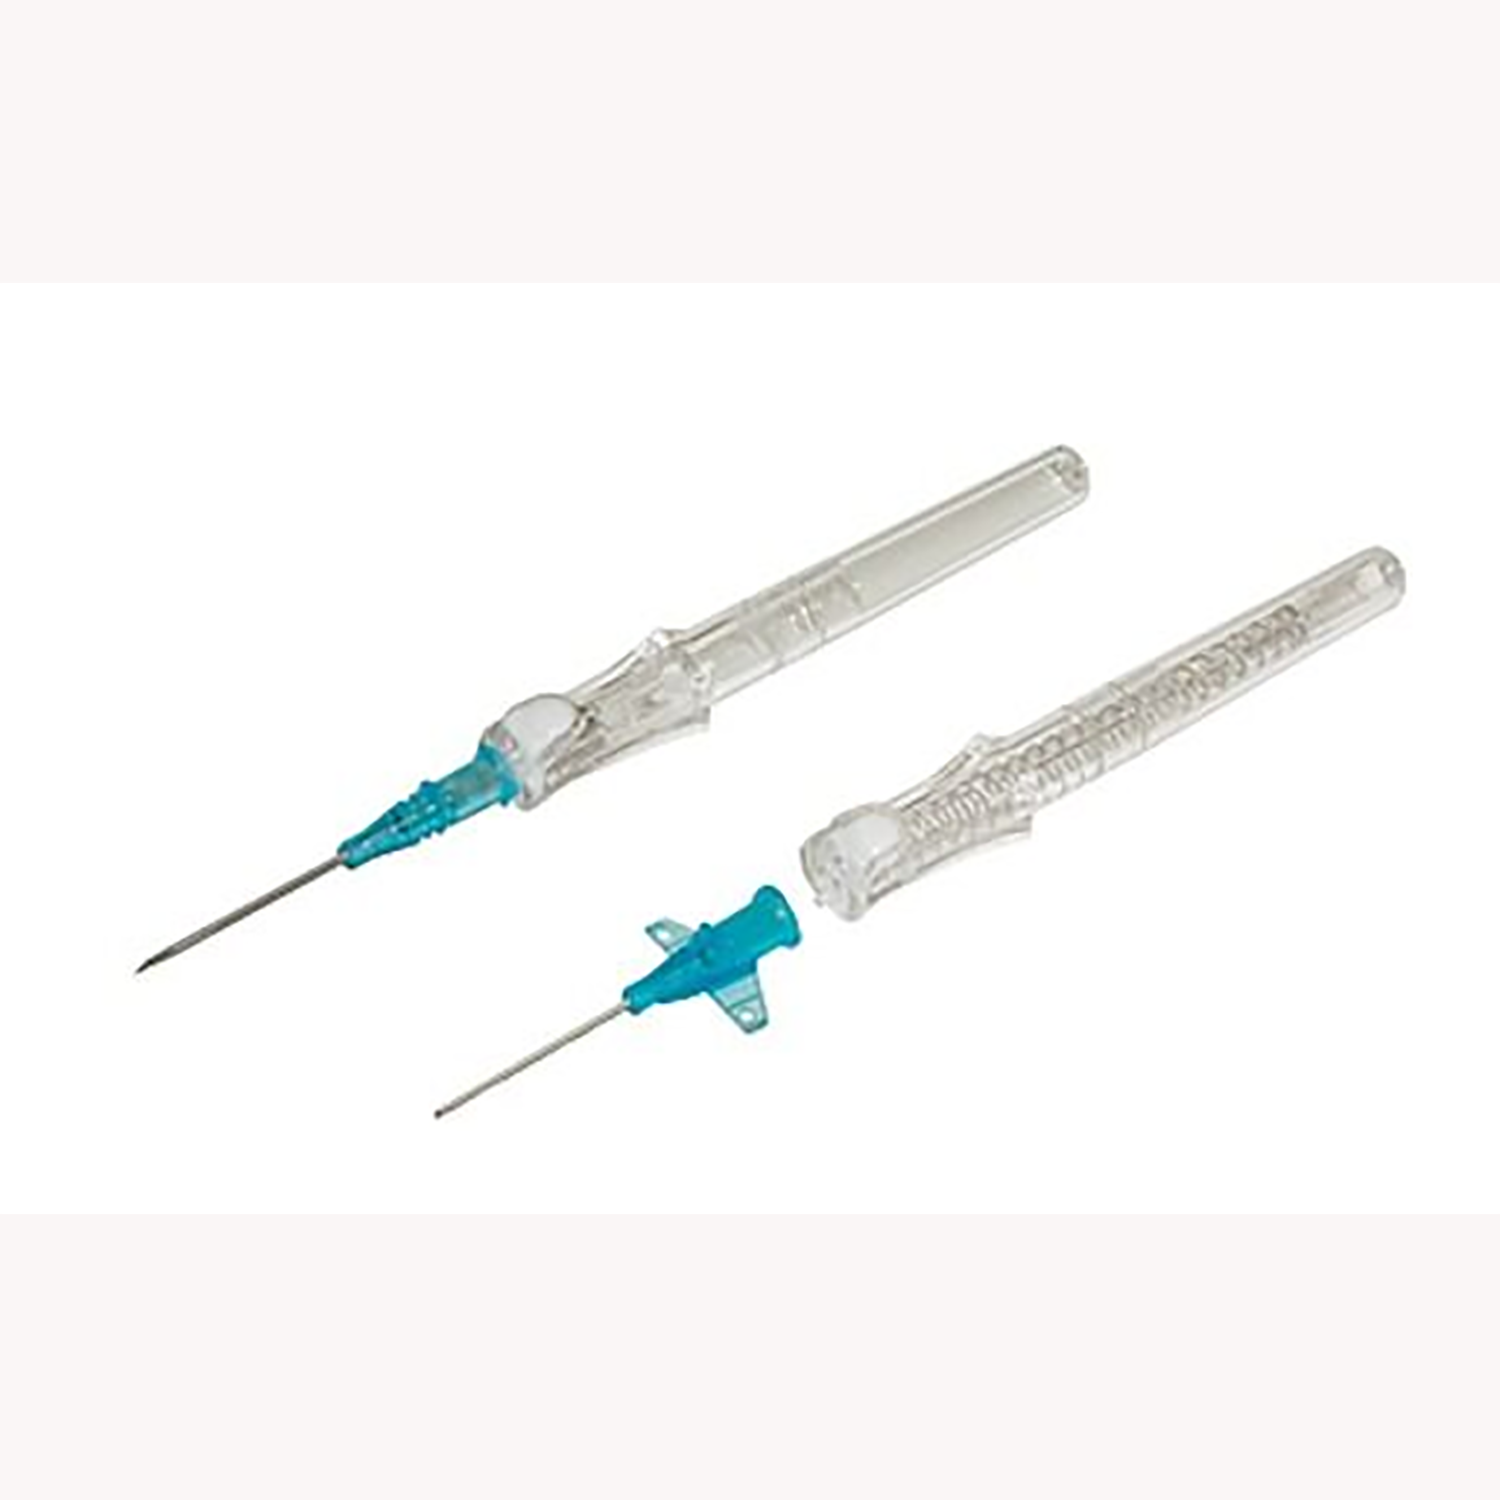 BD Insyte Autoguard Shielded IV Catheter without Wings | Blue x 22G x 25mm | Pack of 50